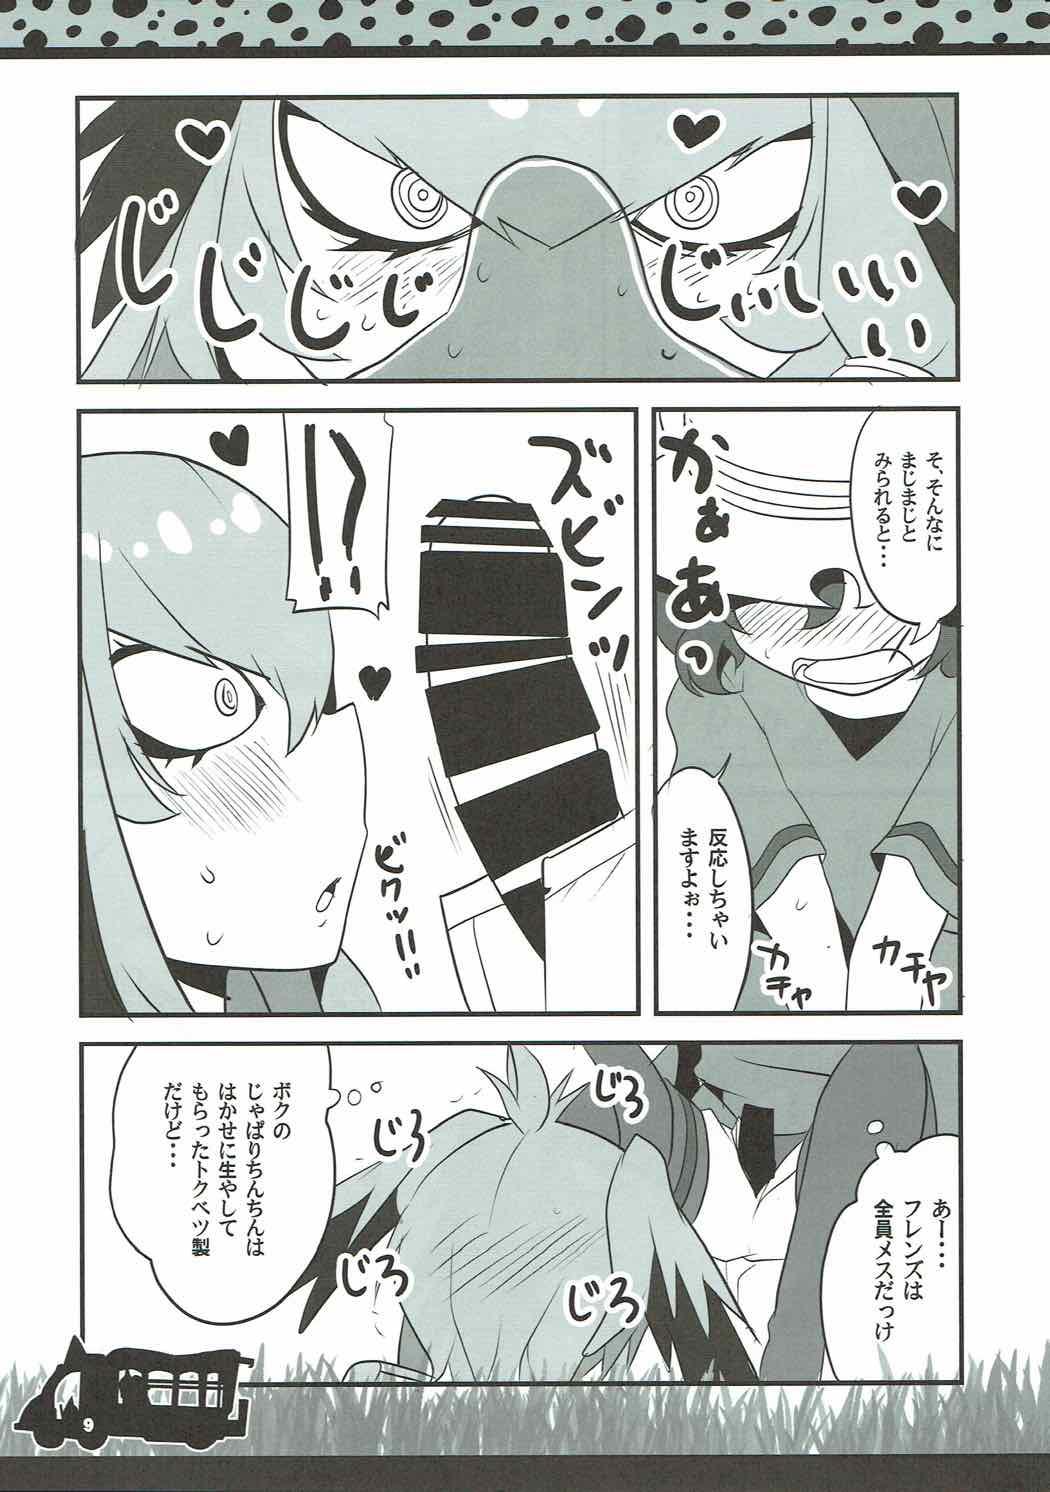 Huge Cock Lovely Gazer - Kemono friends Creampies - Page 8